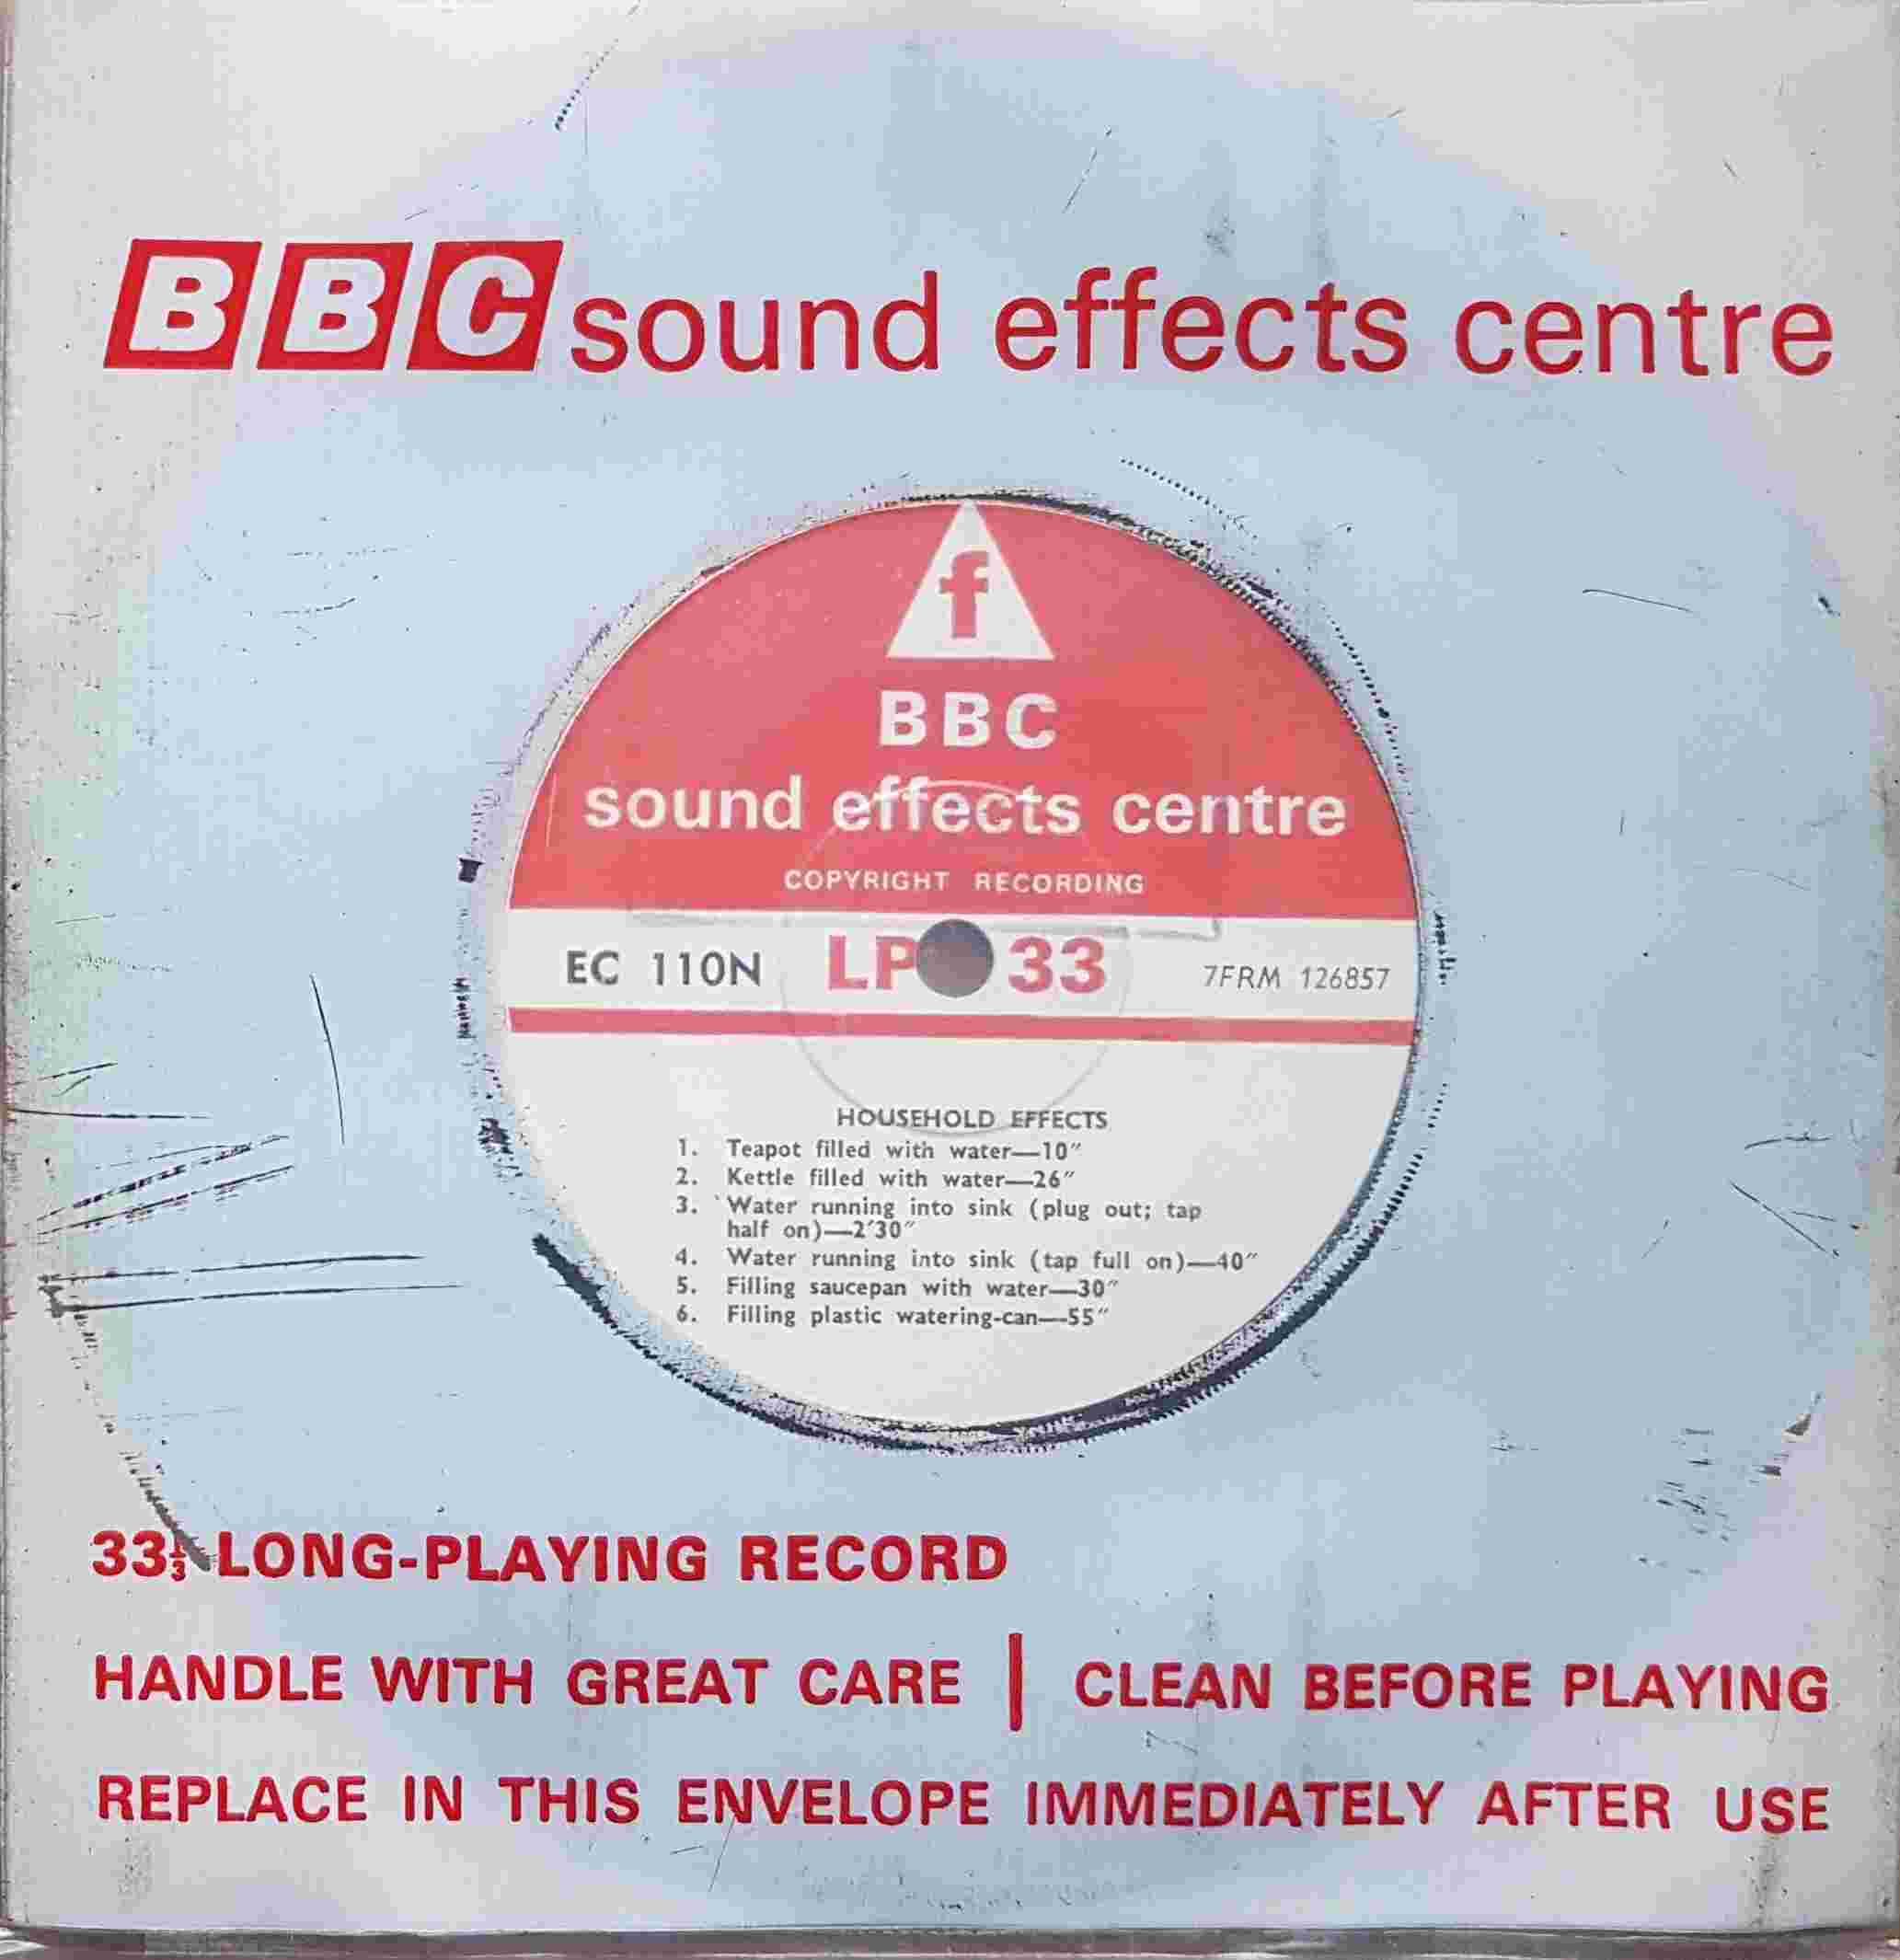 Picture of EC 110N Household effects by artist Not registered from the BBC records and Tapes library